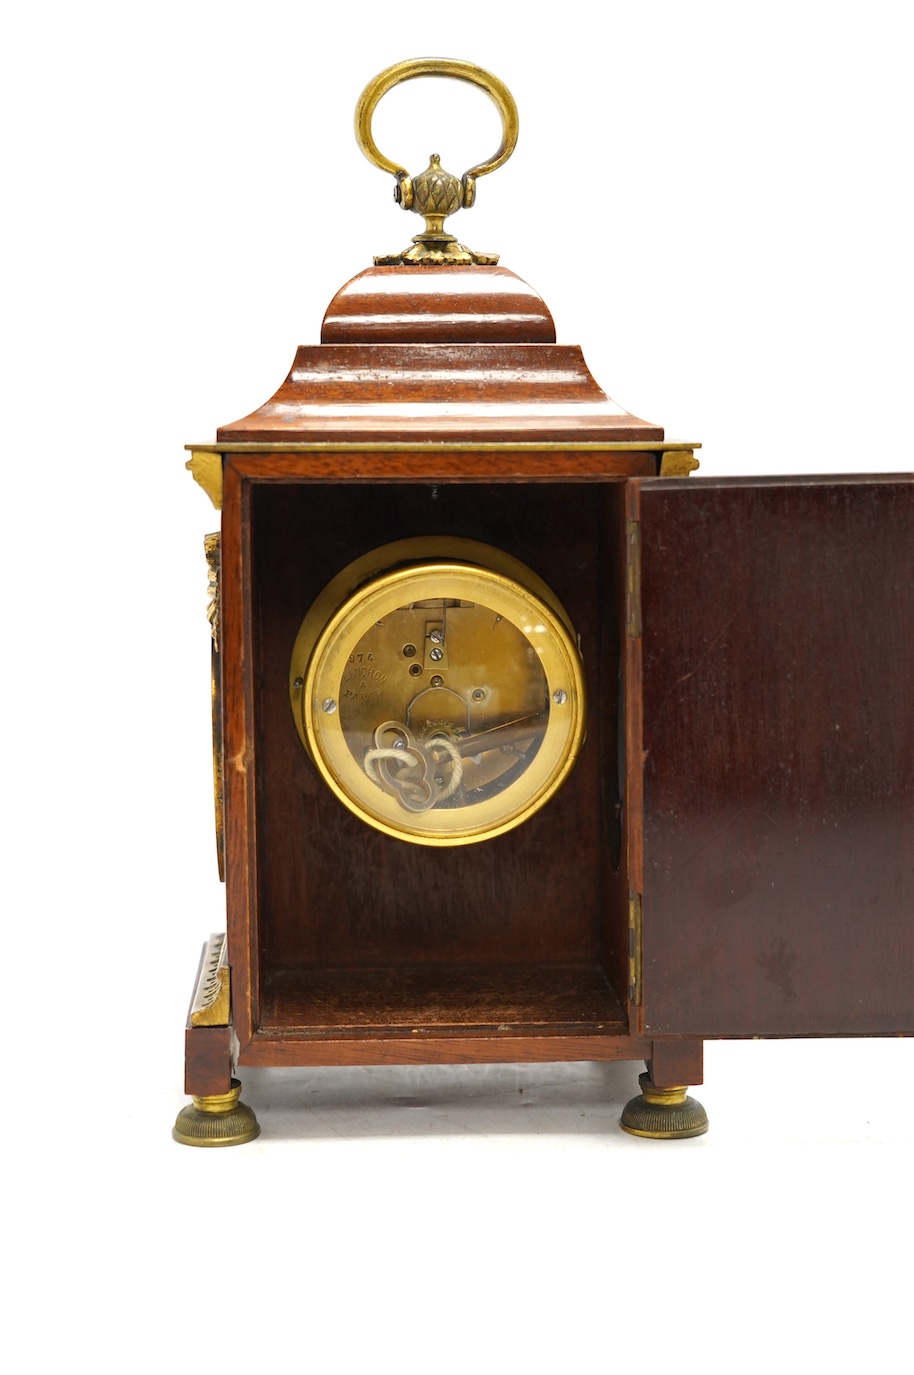 A 19th century French ormolu mounted, mahogany and box wood inlaid timepiece, by Planchon of Paris, with Wedgwood style plaques inlaid to sides, key included, 23cm. Condition - fair to good, not tested as working